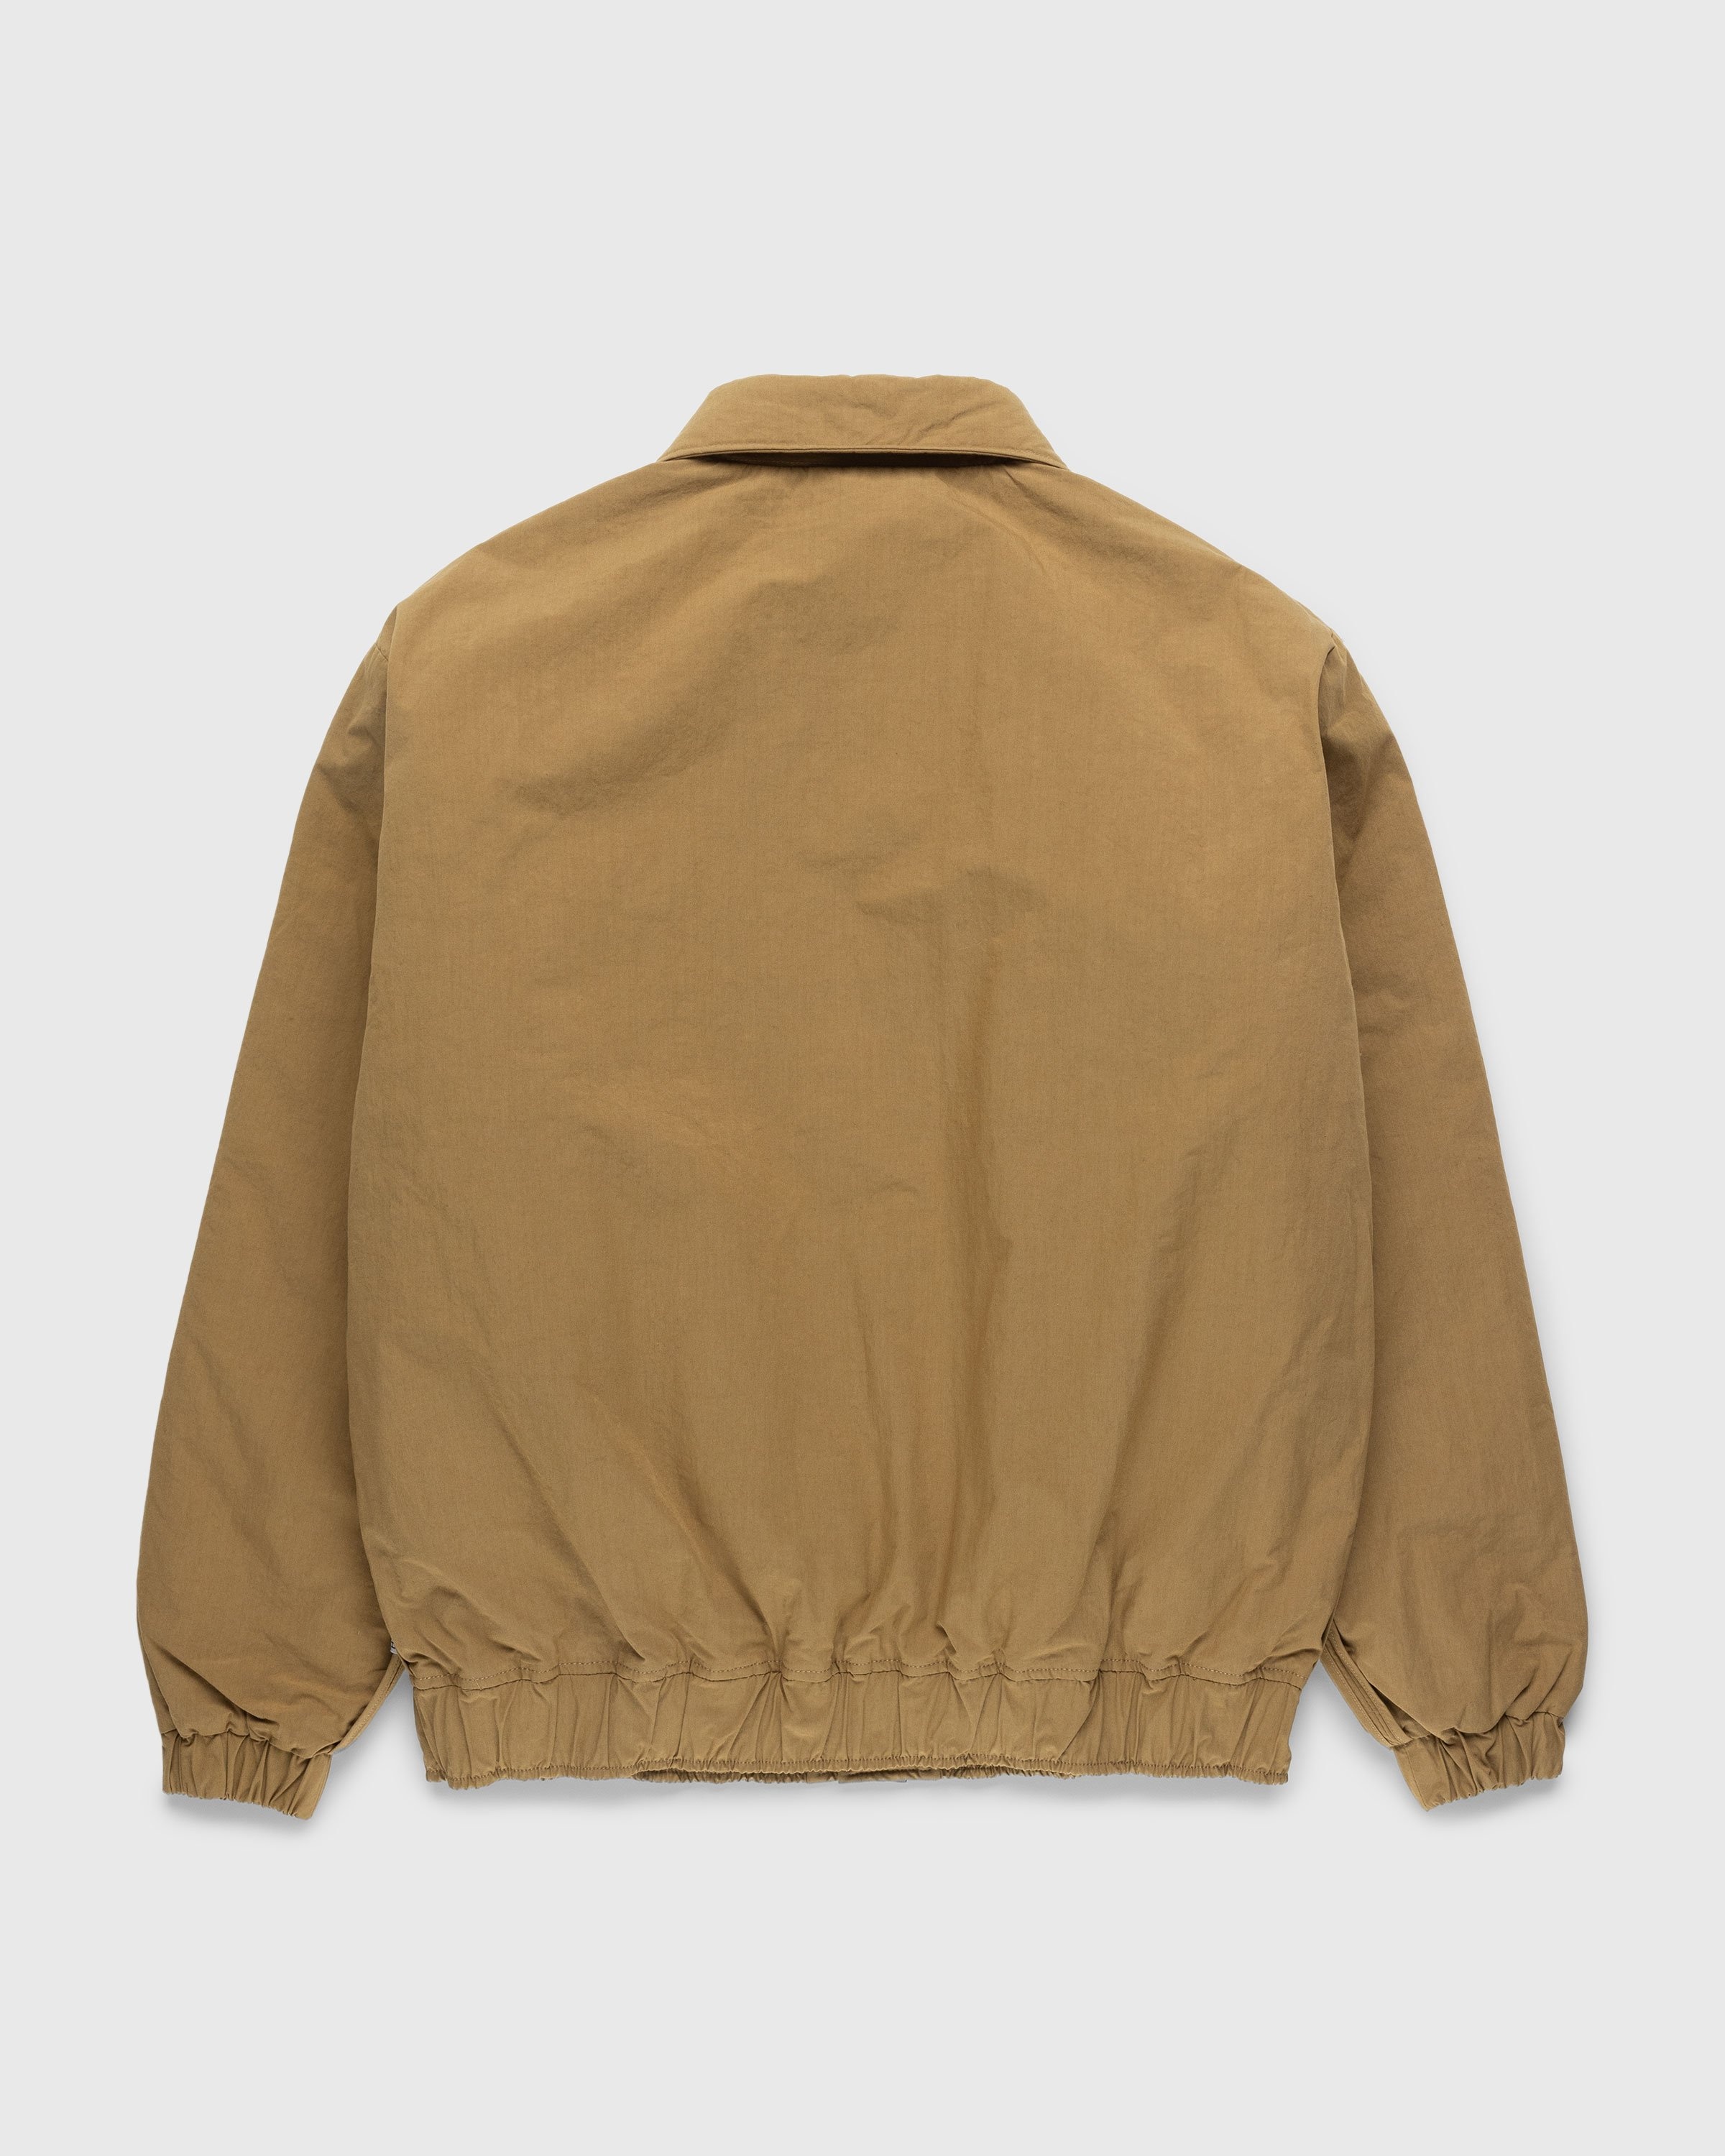 Highsnobiety HS05 – Reverse Piping Insulated Jacket Beige - Outerwear - Beige - Image 2